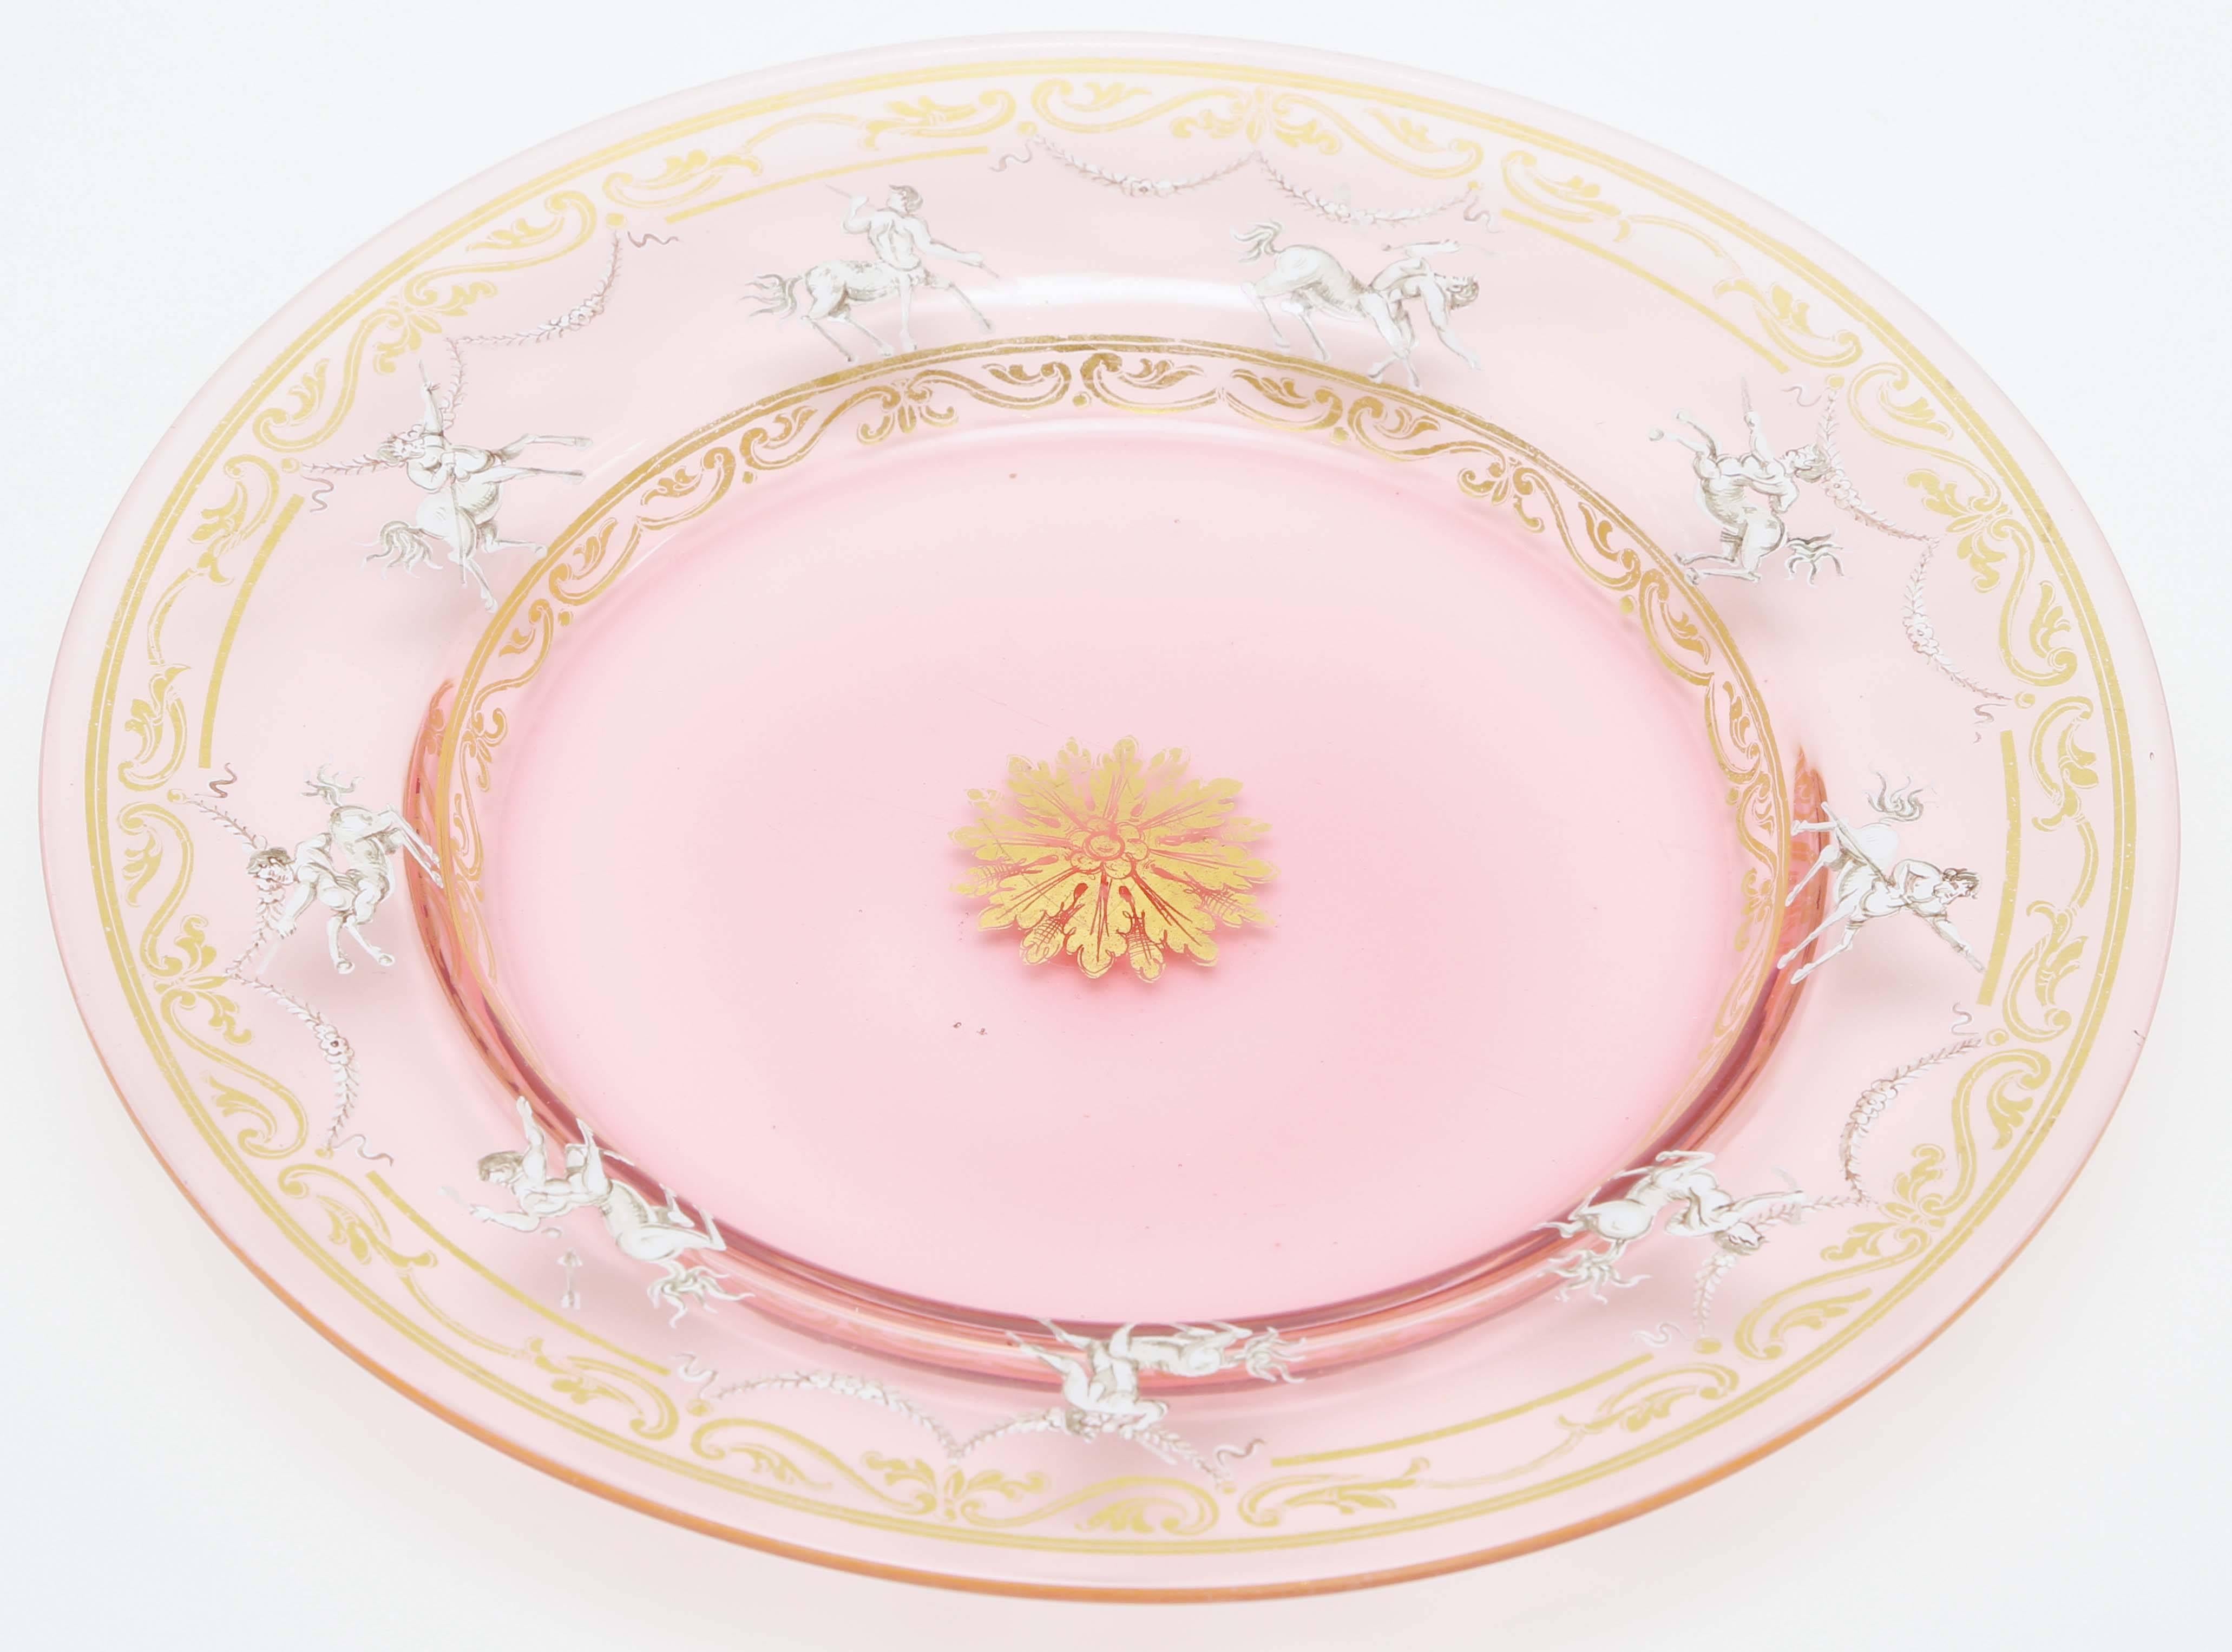 Italian 12 Venetian Antique Plates, Pretty Pink and Gilt with Hand Enamel Decoration